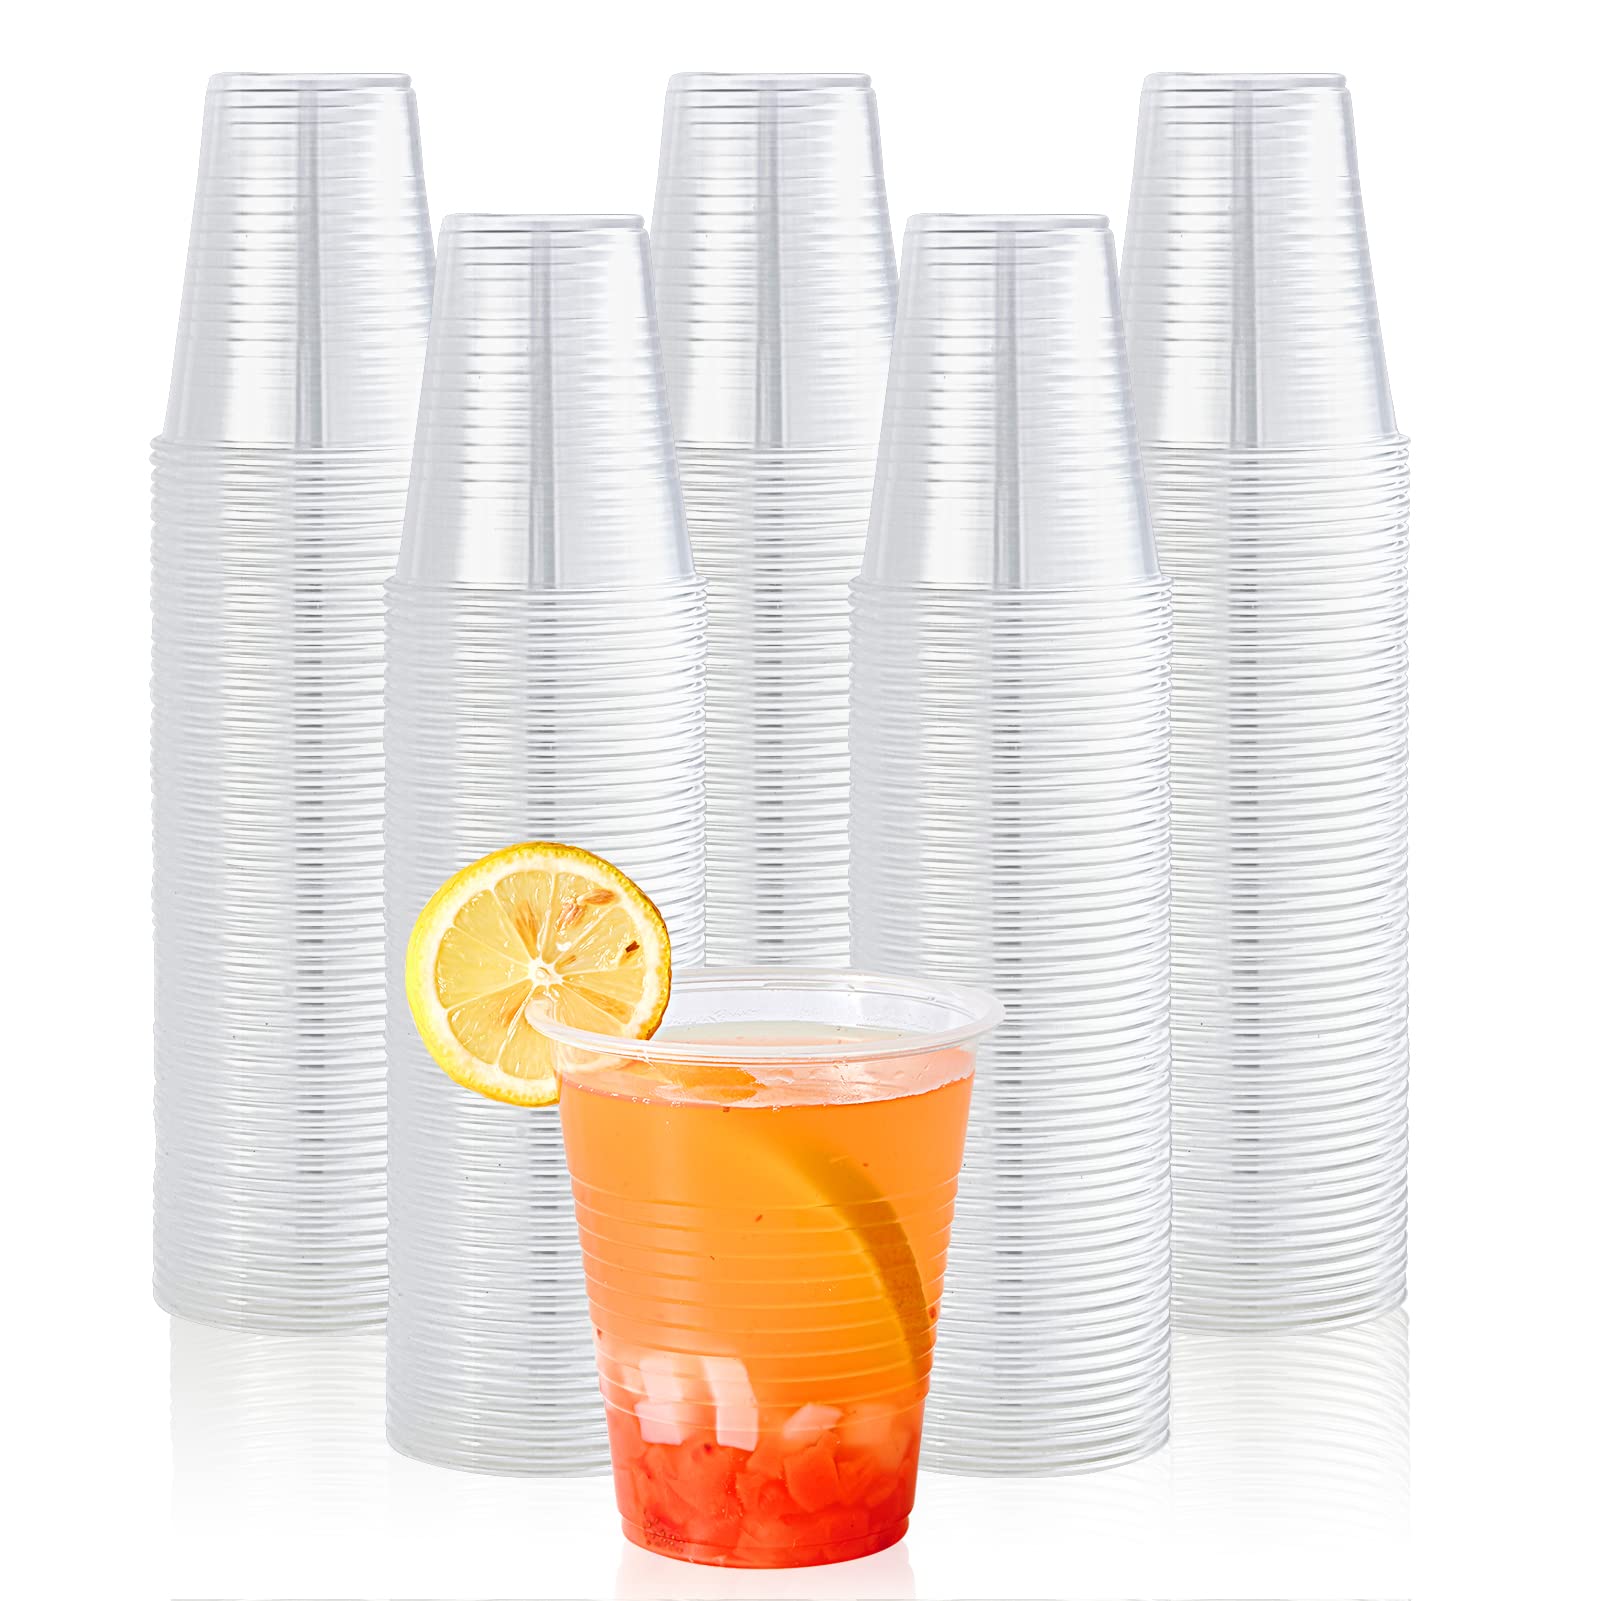 Lilymicky 300 Pack 12oz Clear Plastic Cups,Cold Party Drinking Cups,Disposable  Plastic Cups for Parties, Picnic, BBQ, Travel, & Events 12 oz-300ct